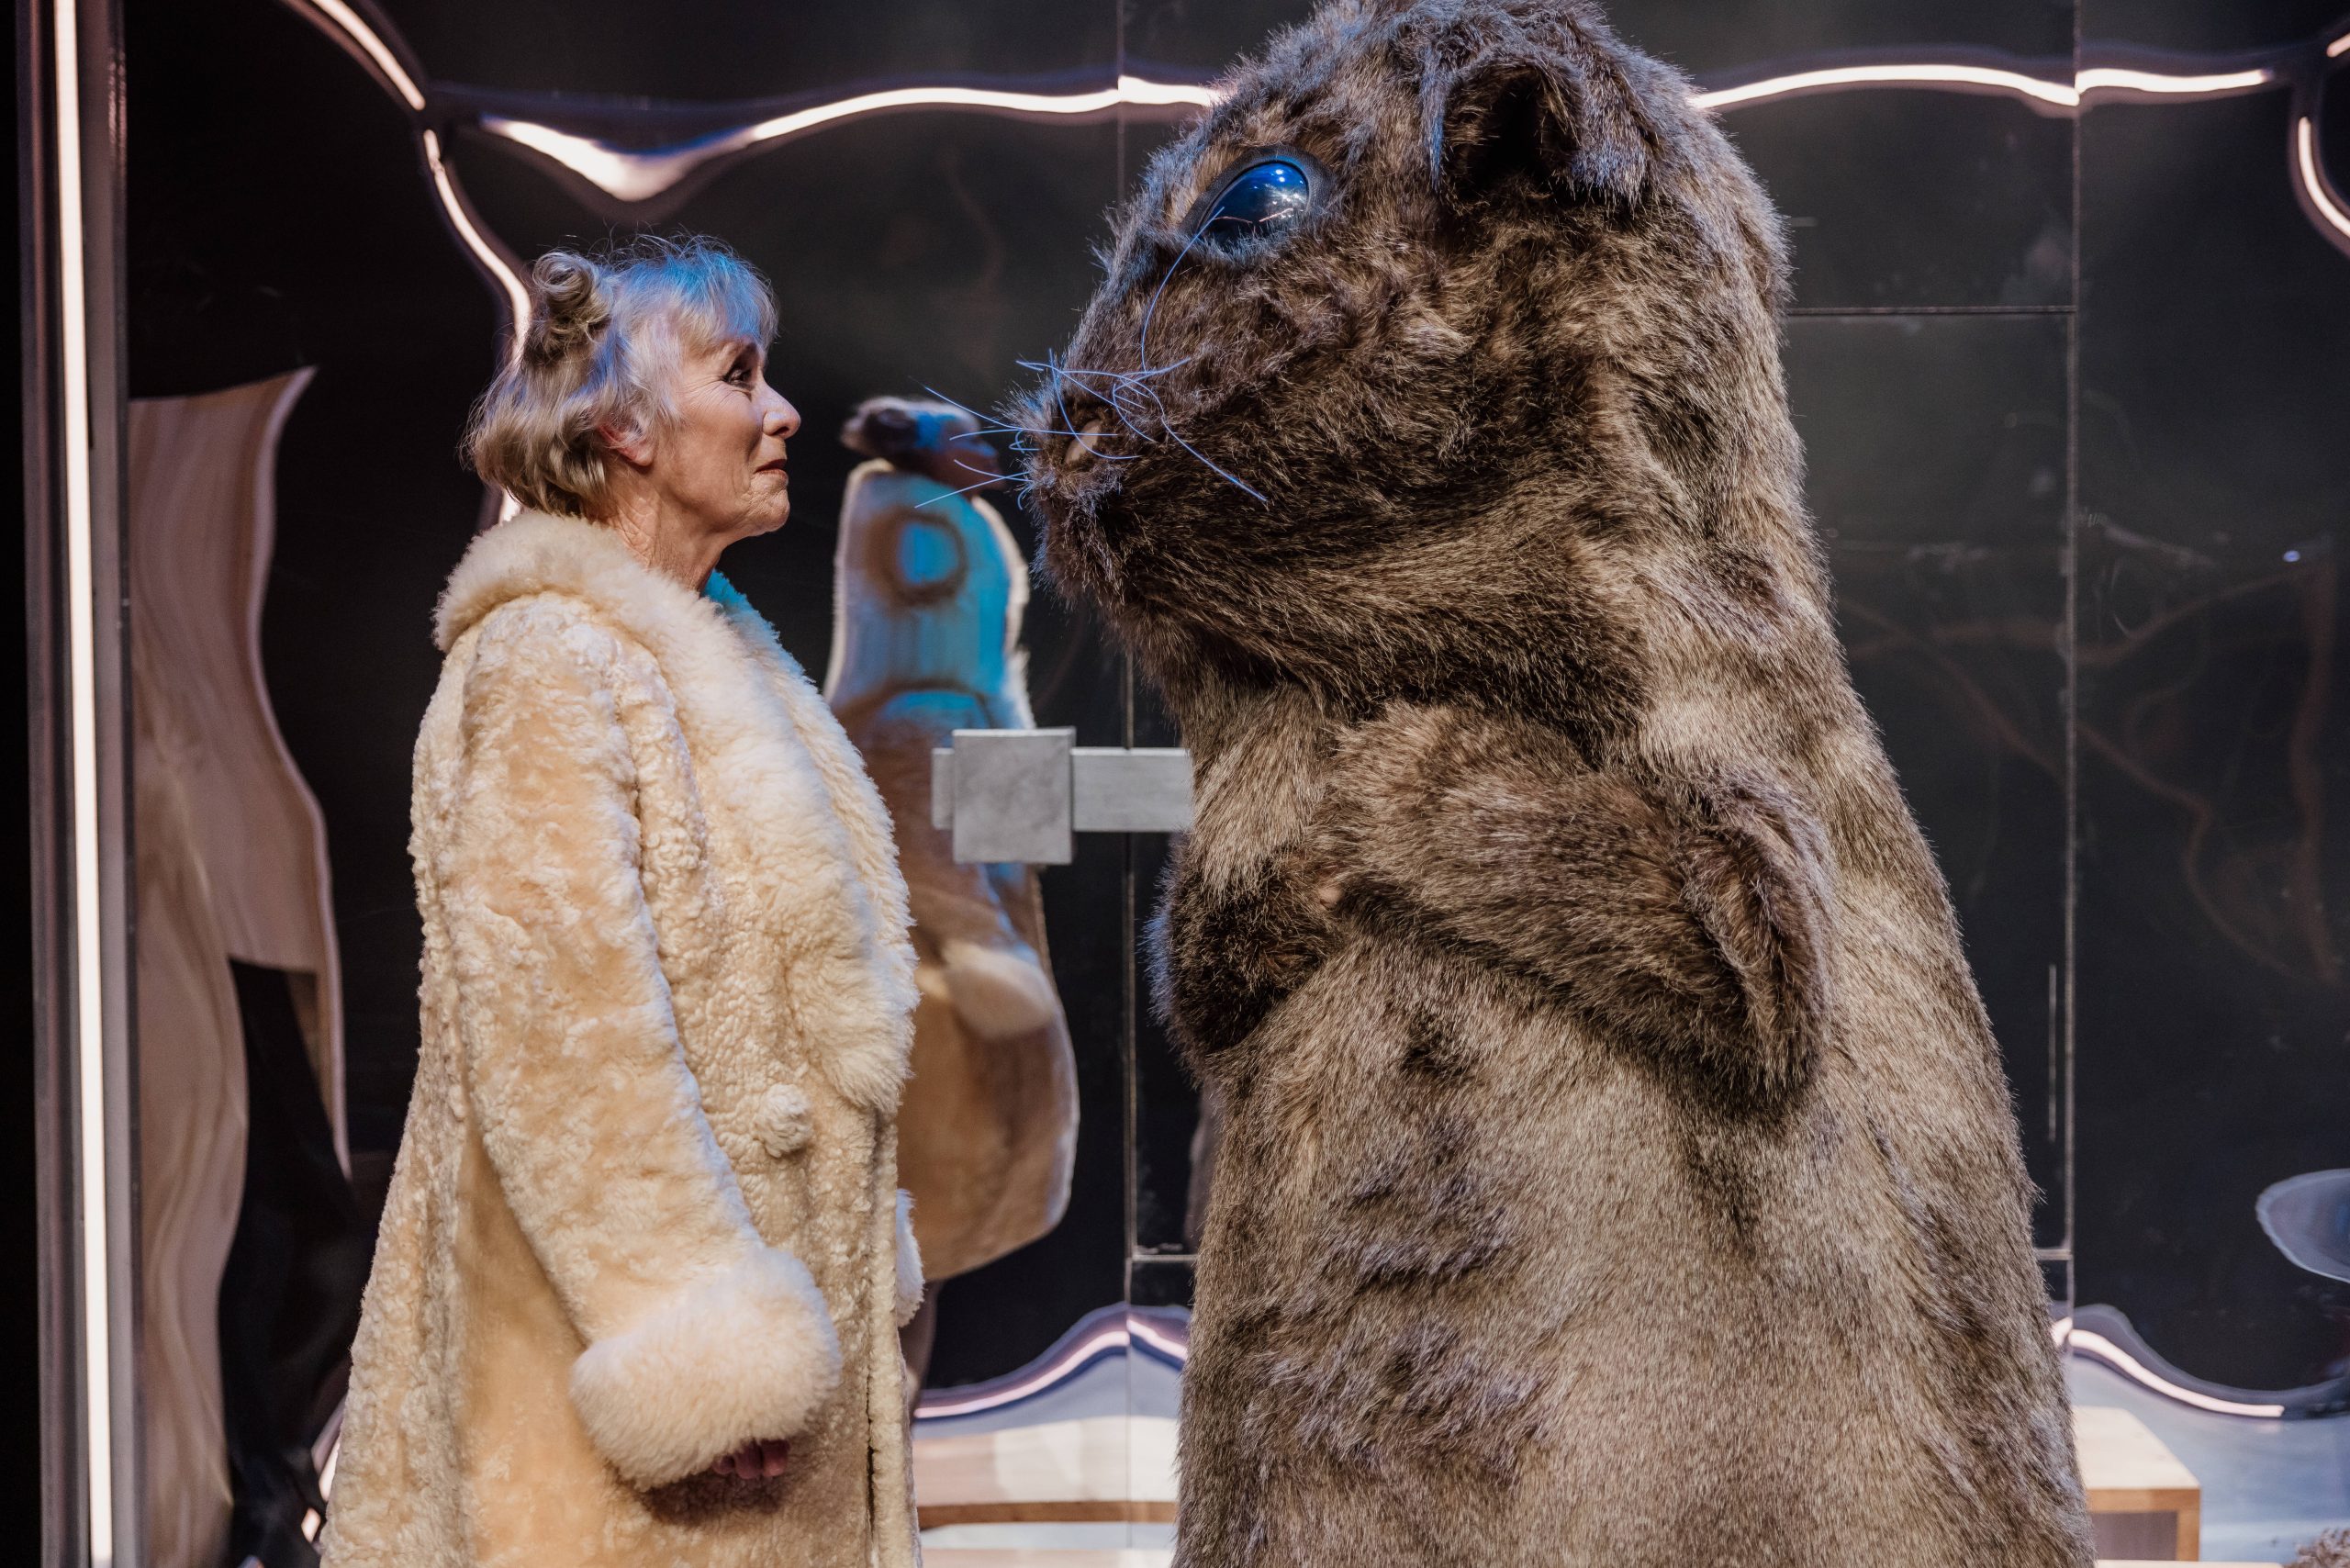 Actress dressed in furcoat looks into the eyes of a human sized guinea pig